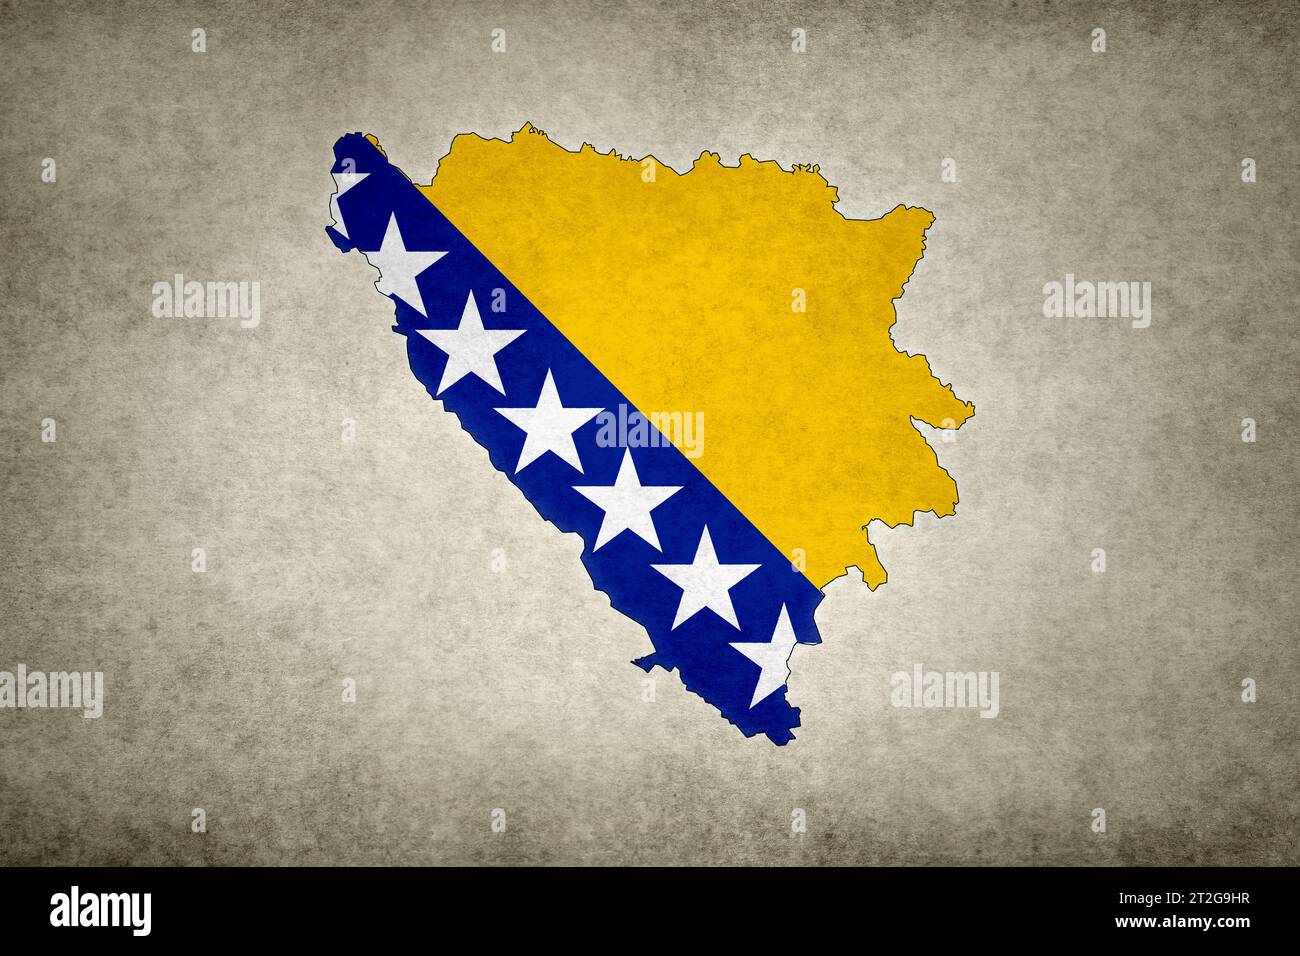 Grunge map of Bosnia and Herzegovina with its flag printed within its border on an old paper. Stock Photo